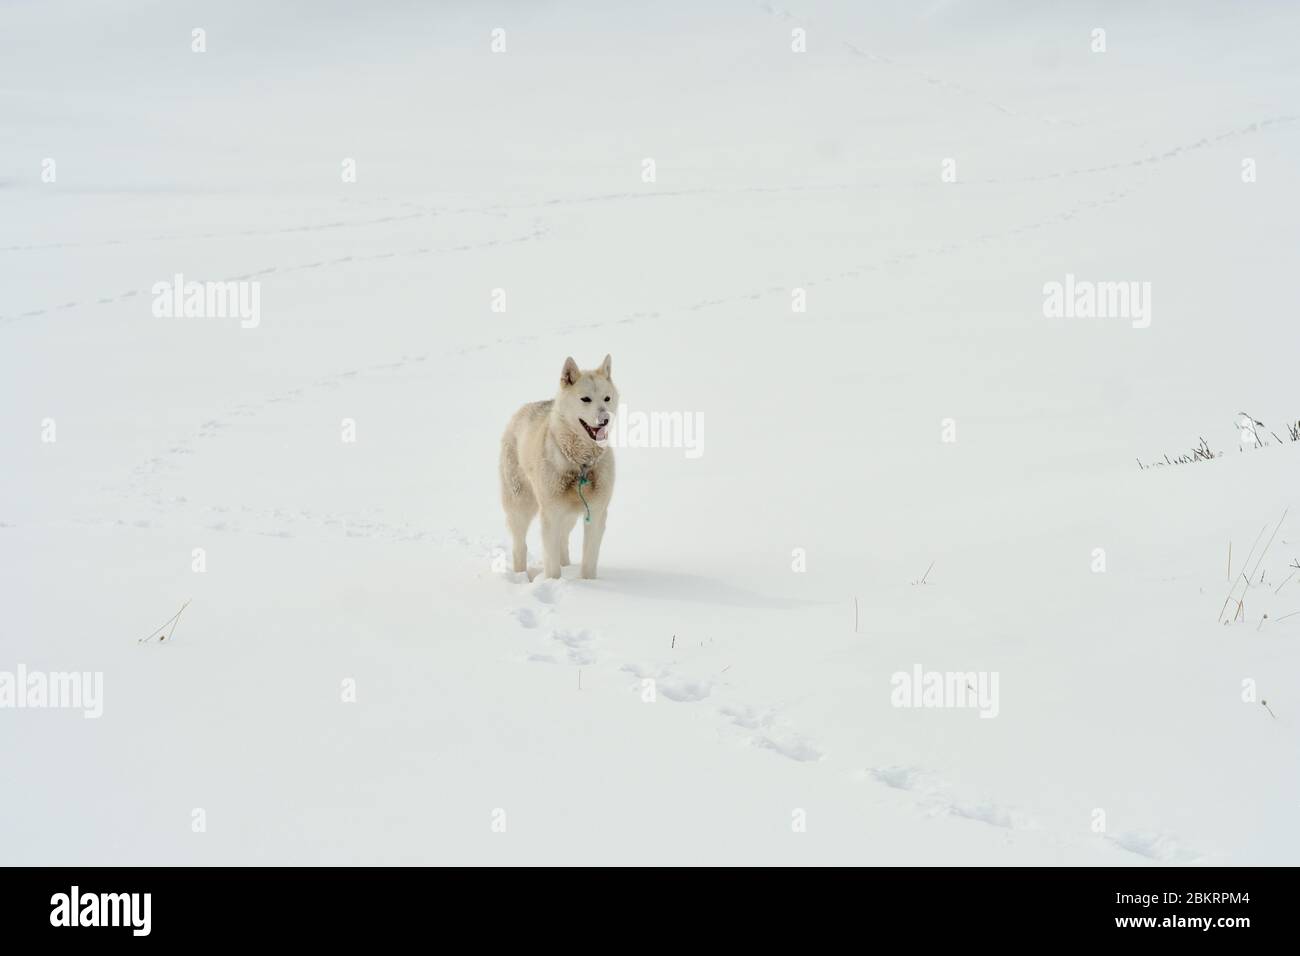 Lone sled dog husky walking around in the snow Stock Photo